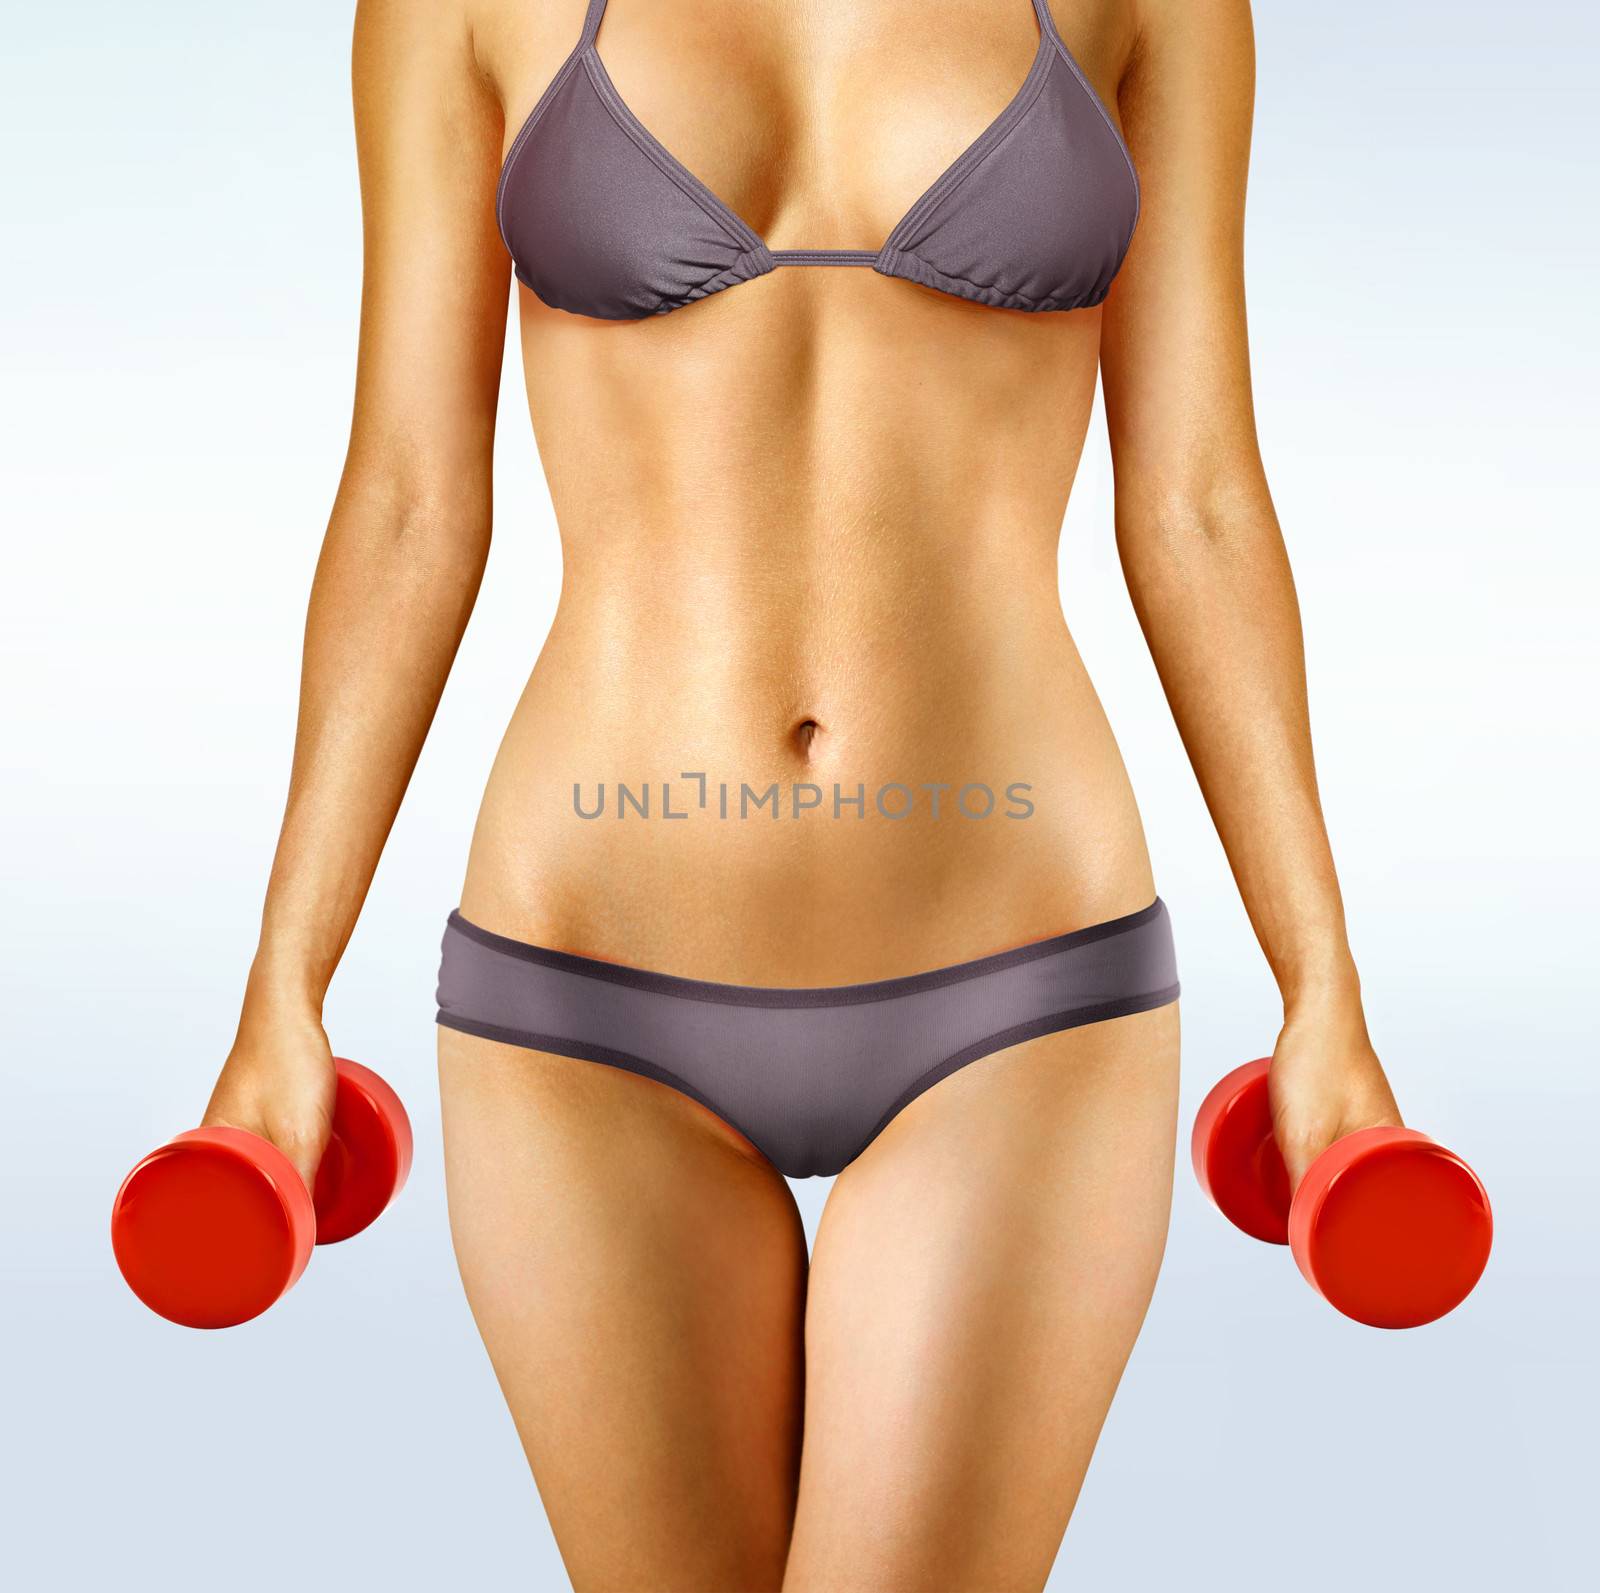 body of woman with dumbbells by ssuaphoto